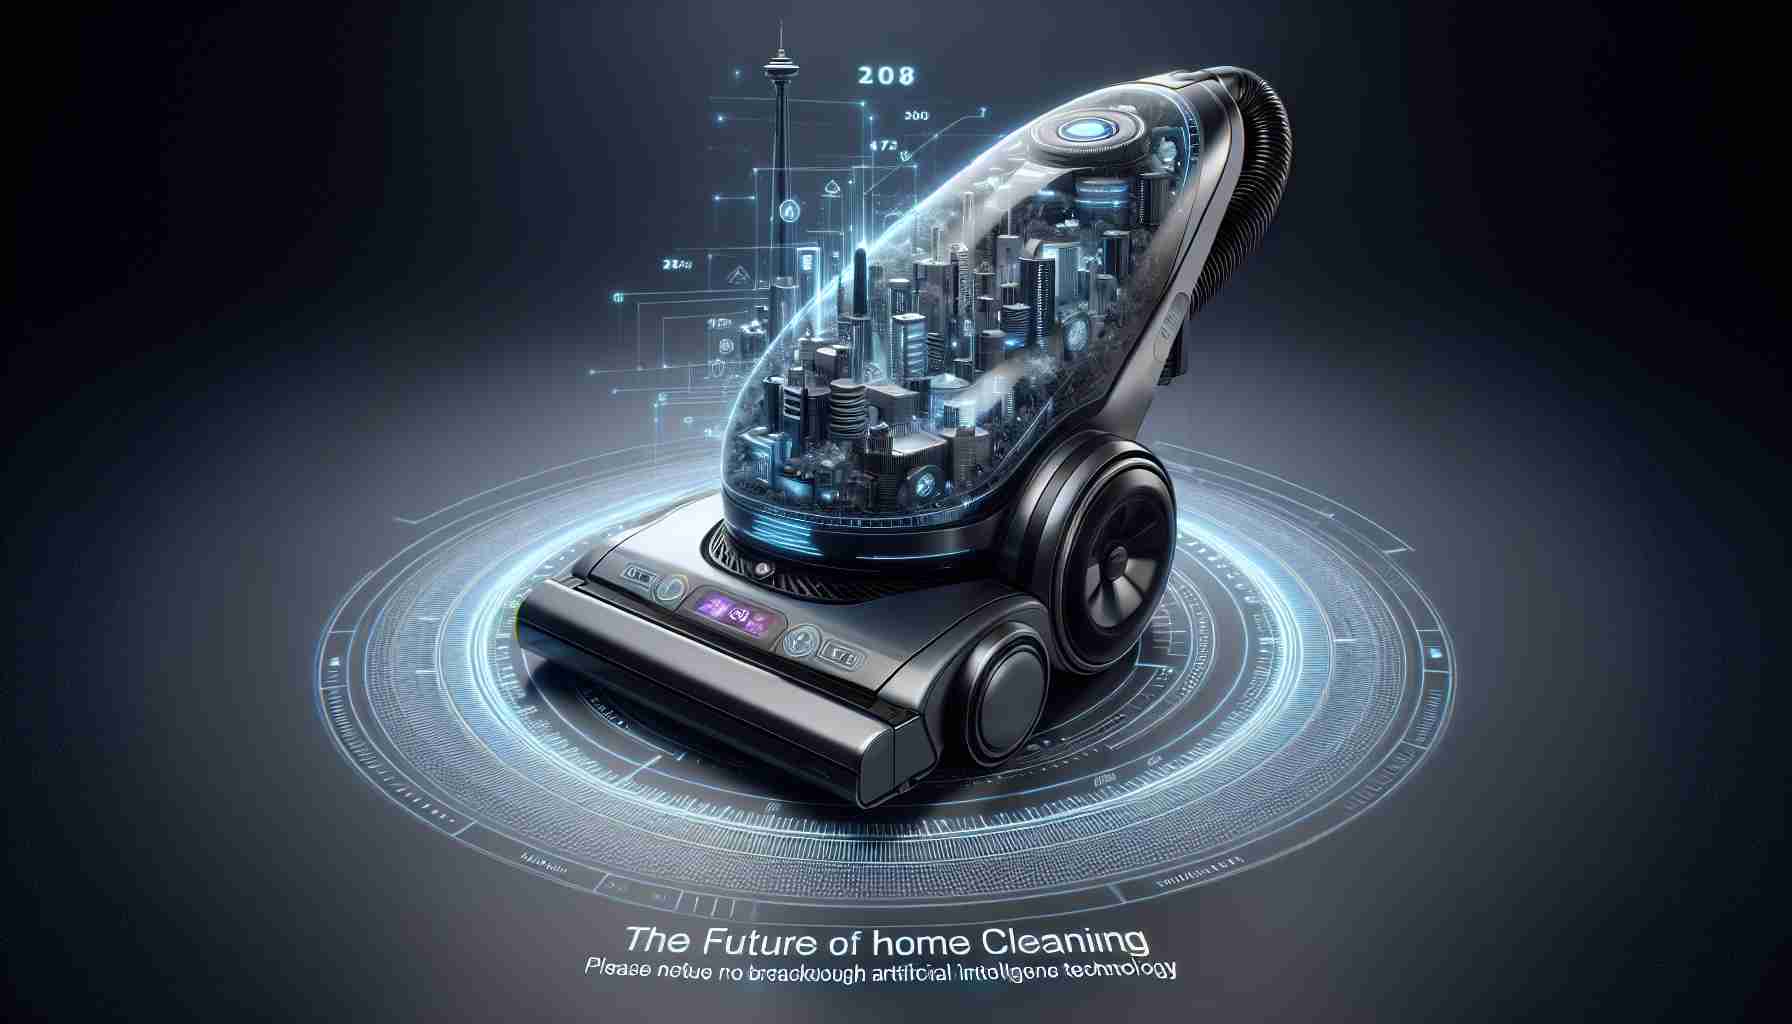 Revolutionize Home Cleaning with Samsung’s AI-Infused Vacuum